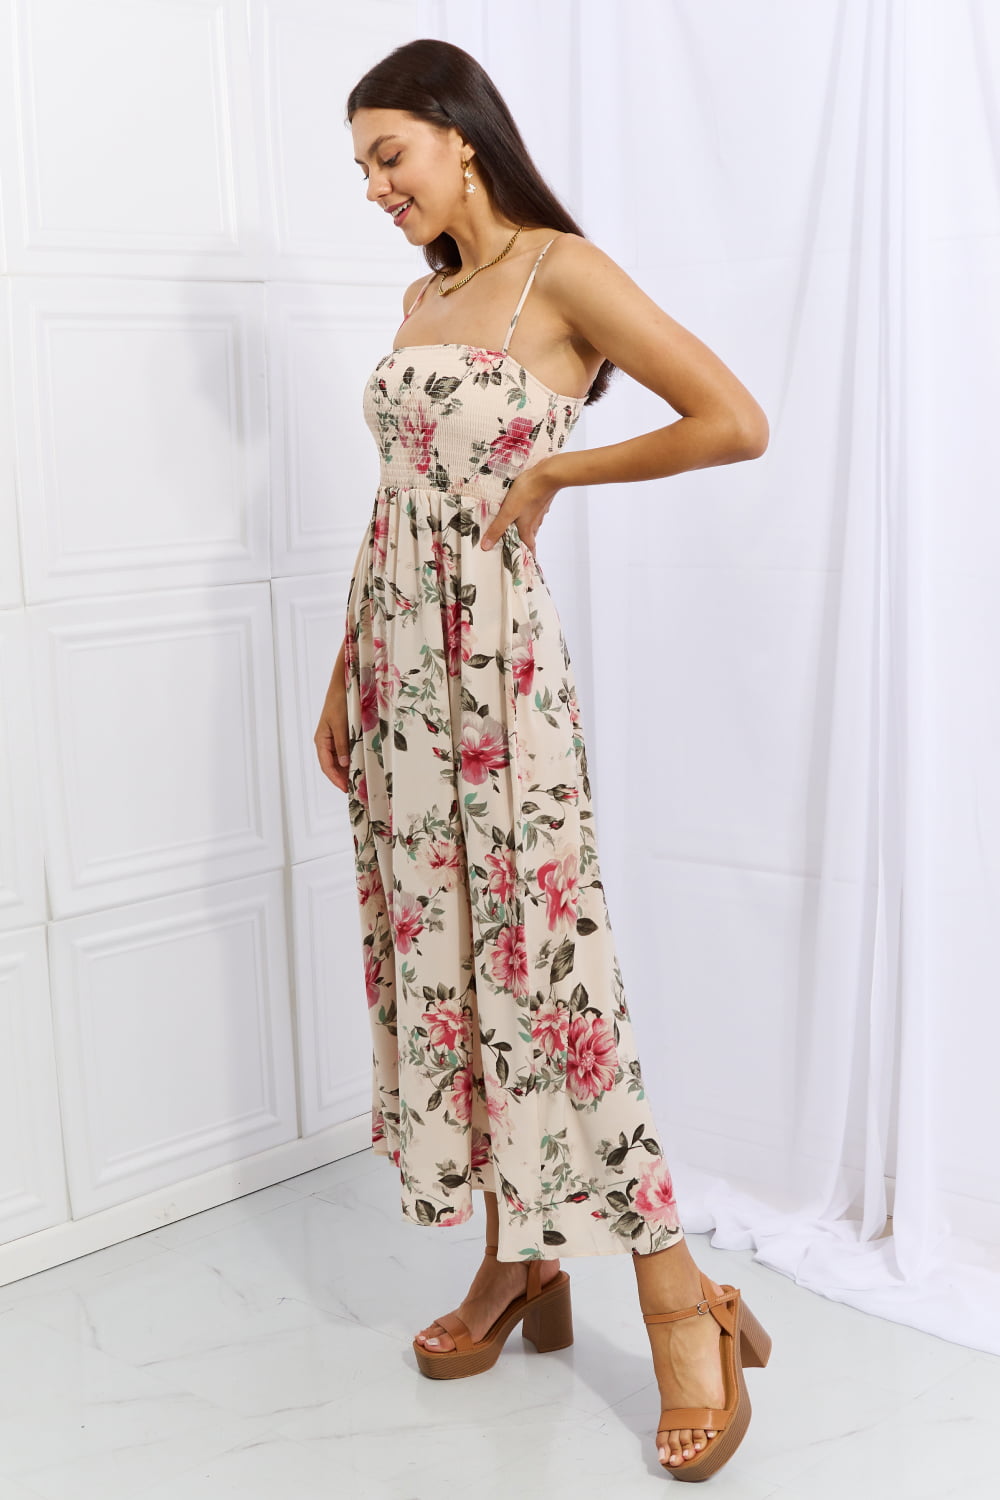 OneTheLand Hold Me Tight Sleevless Floral Maxi Dress in Pink Dress